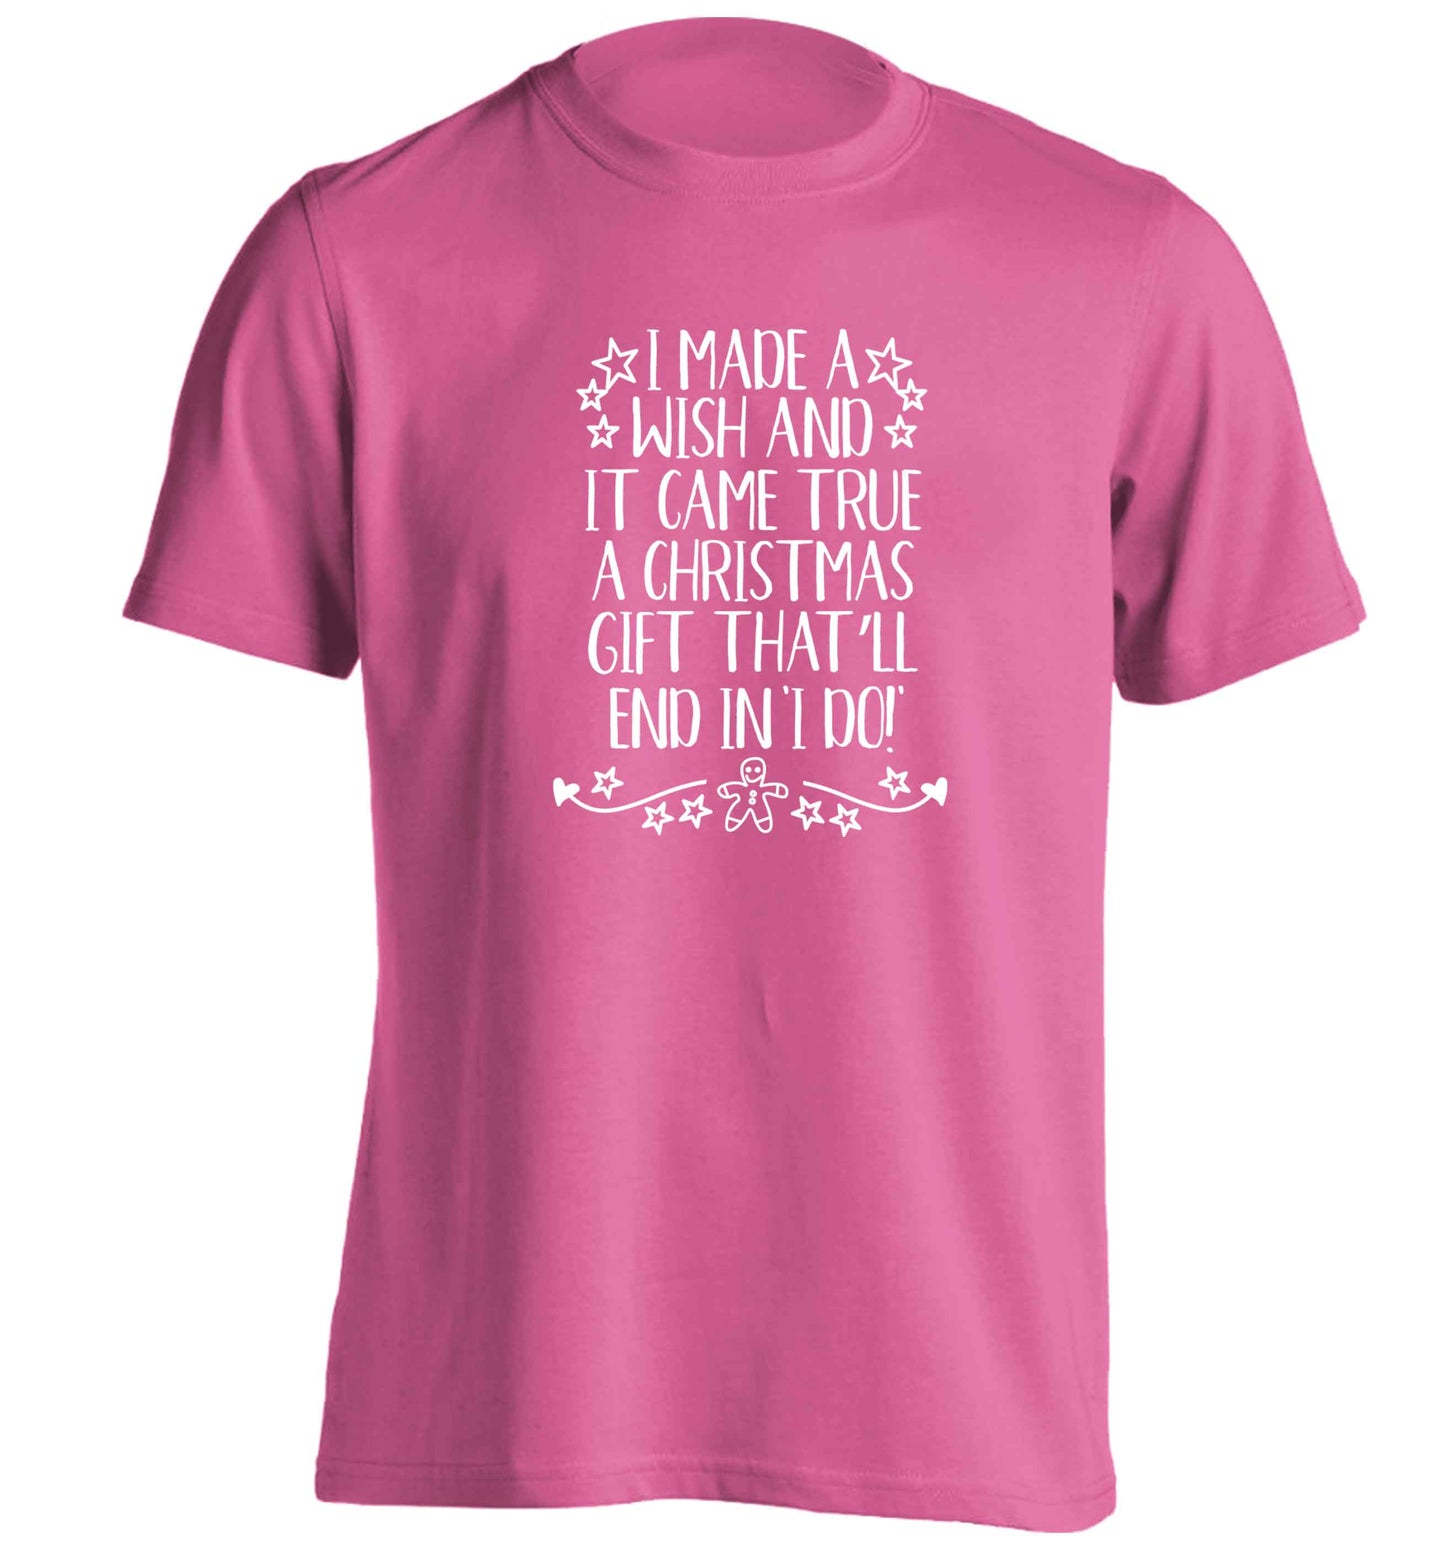 I made a wish and it came true a Christmas gift that'll end in 'I do' adults unisex pink Tshirt 2XL